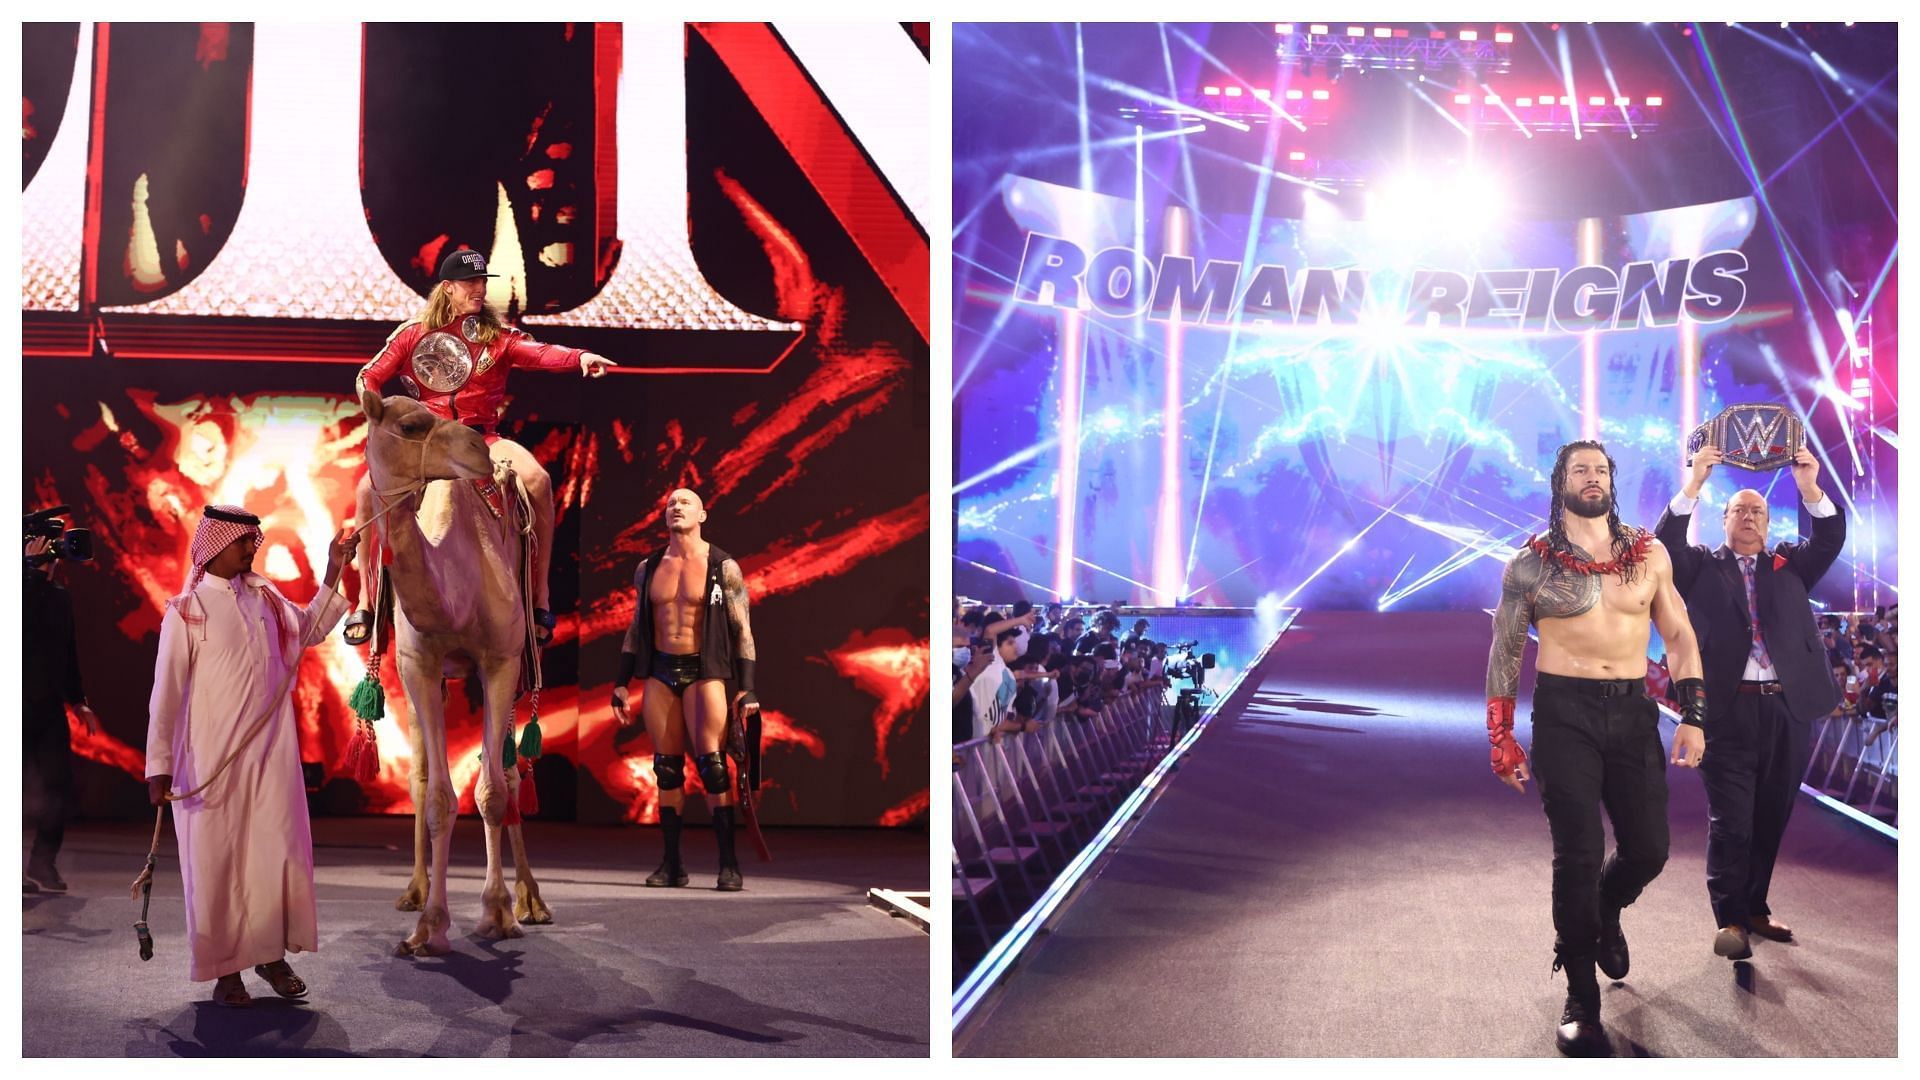 Crown Jewel has seen some absolutely incredible entrances!